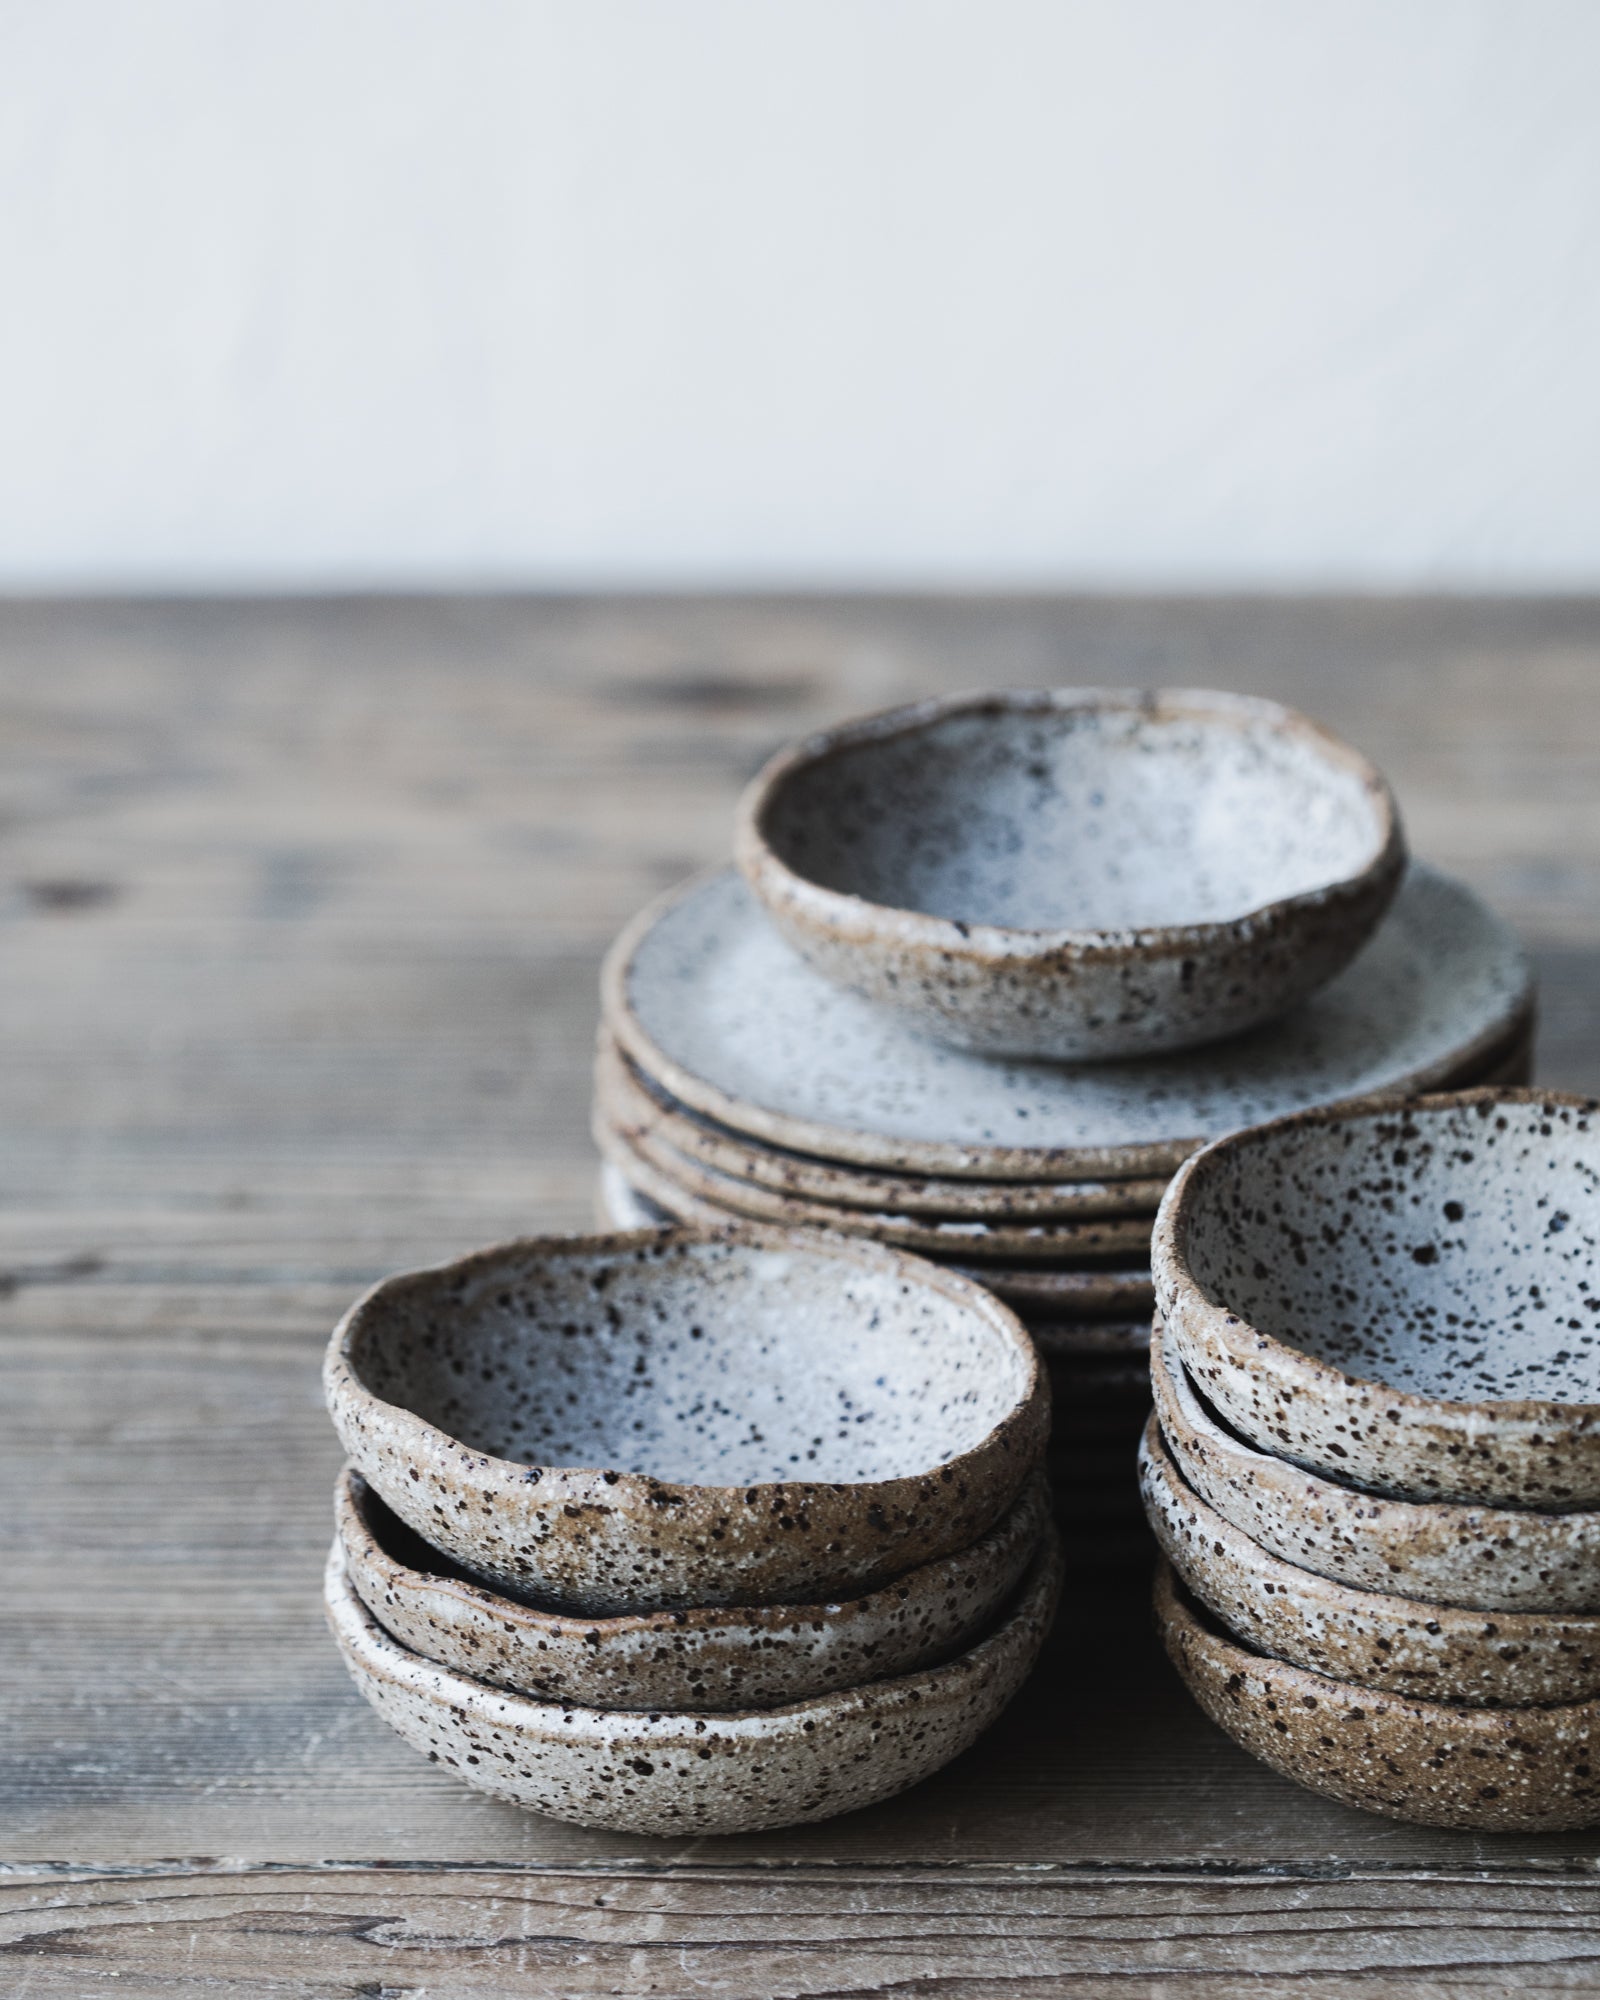 Rustic speckled ceramic bowls and plates sets by clay beehive ceramics